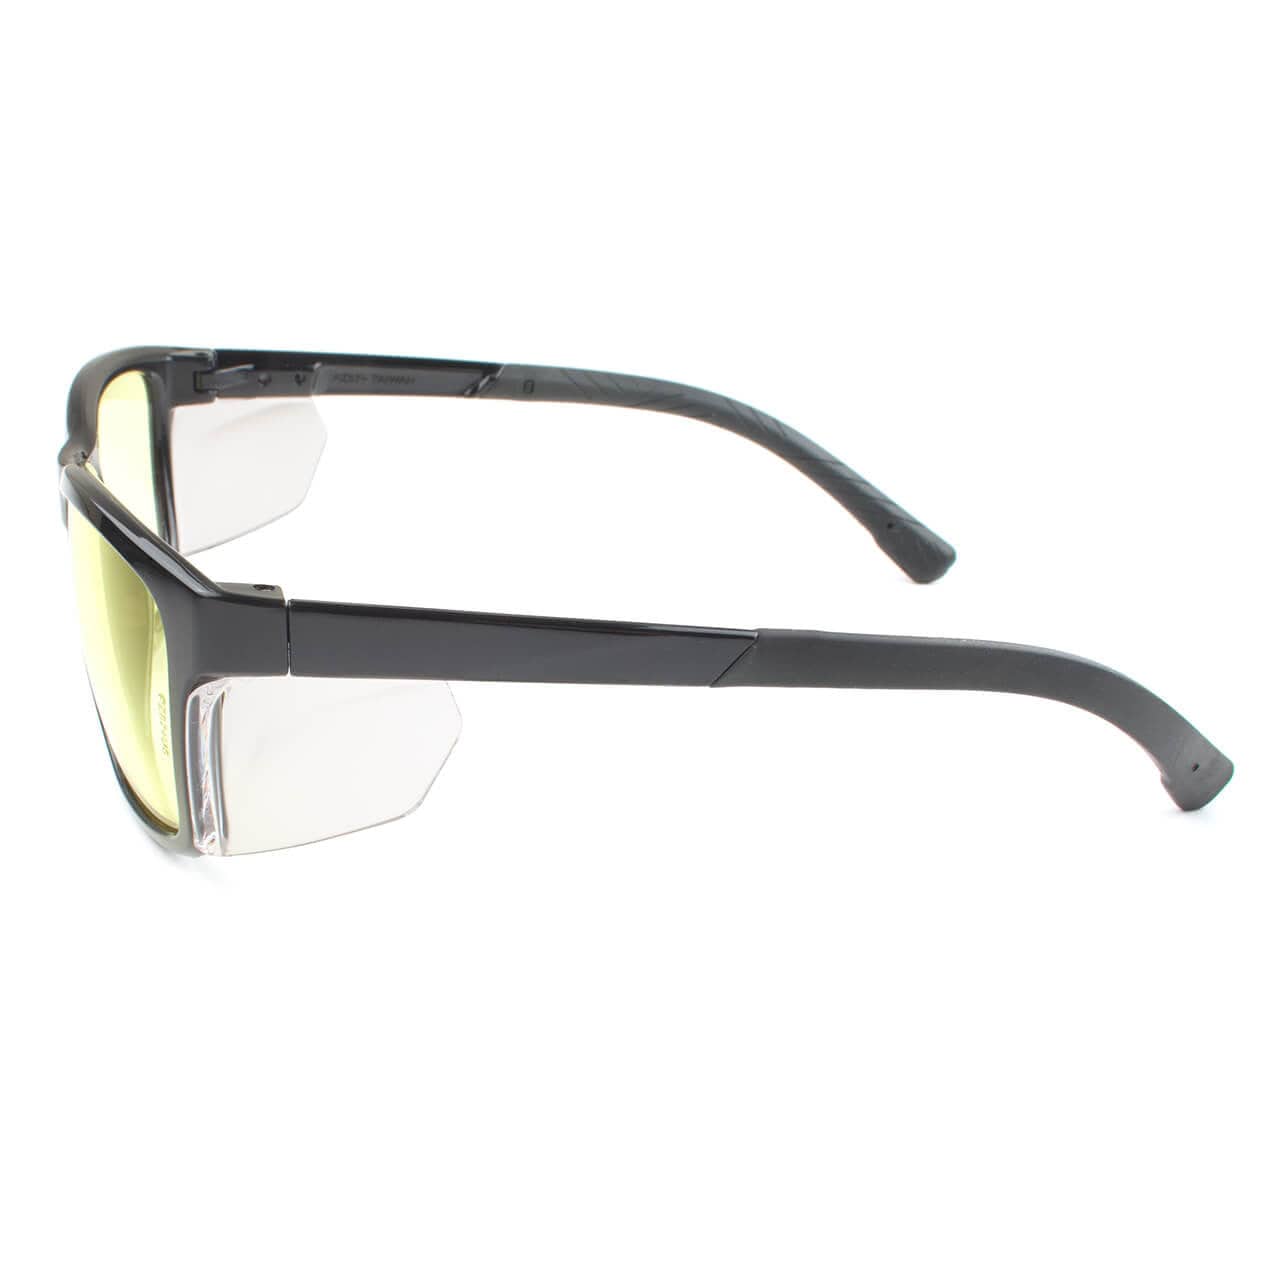 Metel M40 Safety Glasses with Black Frame and UV400 Blue Block Lenses Side View